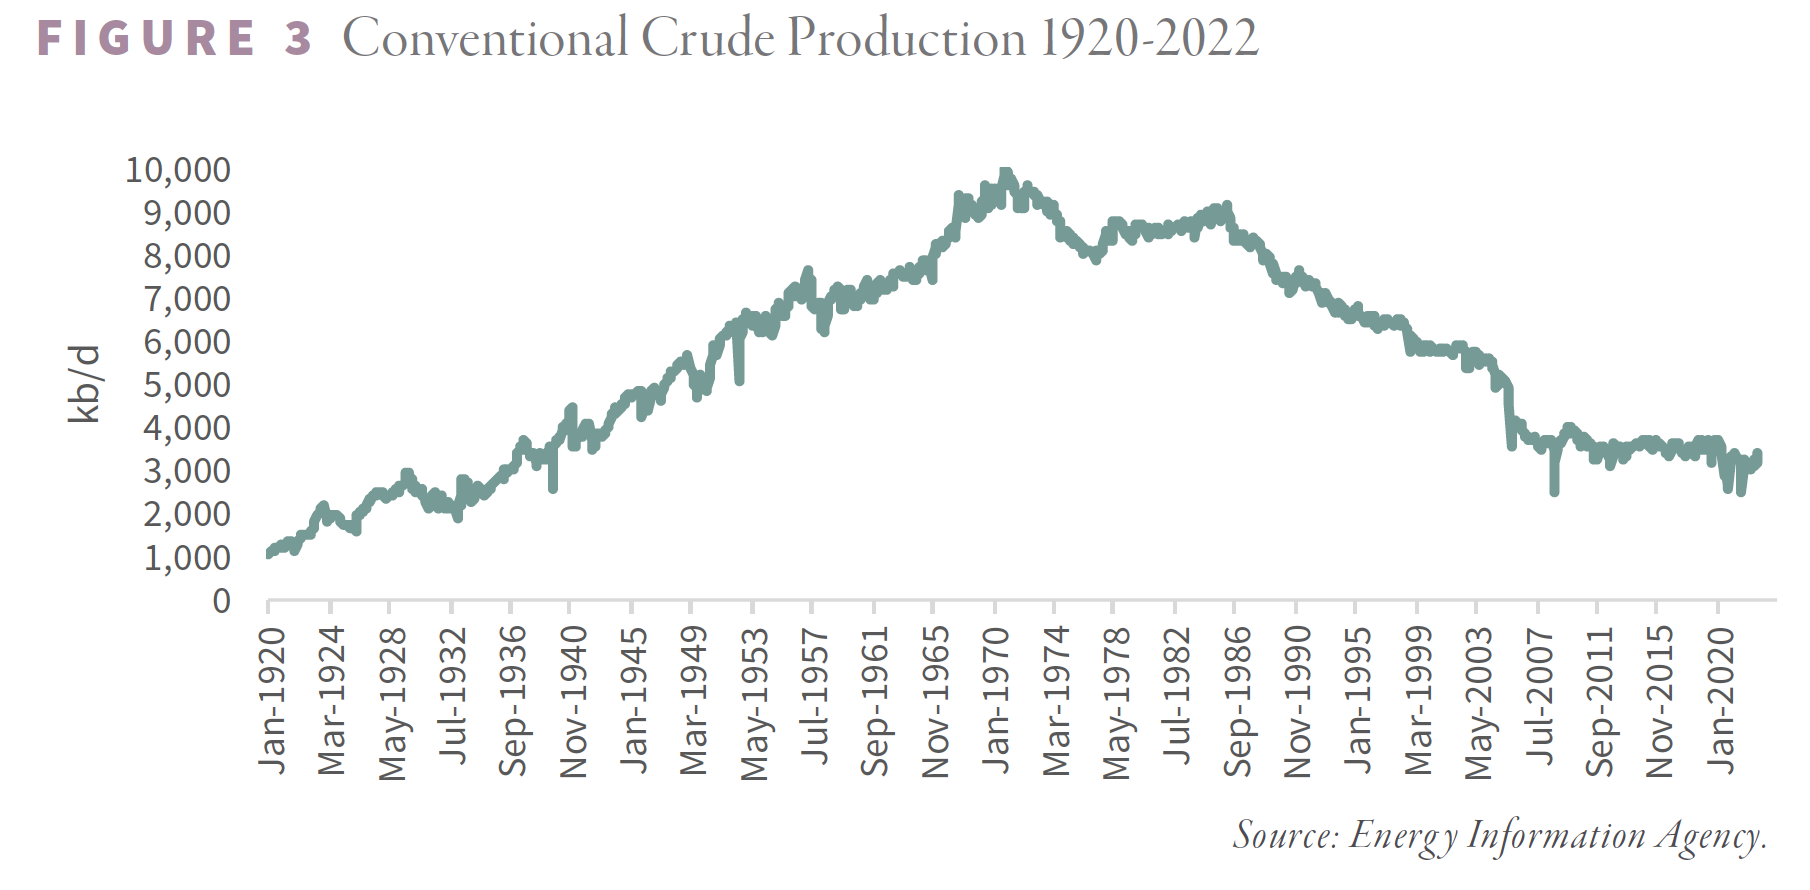 Conventional Crude Production 1920 - 2022